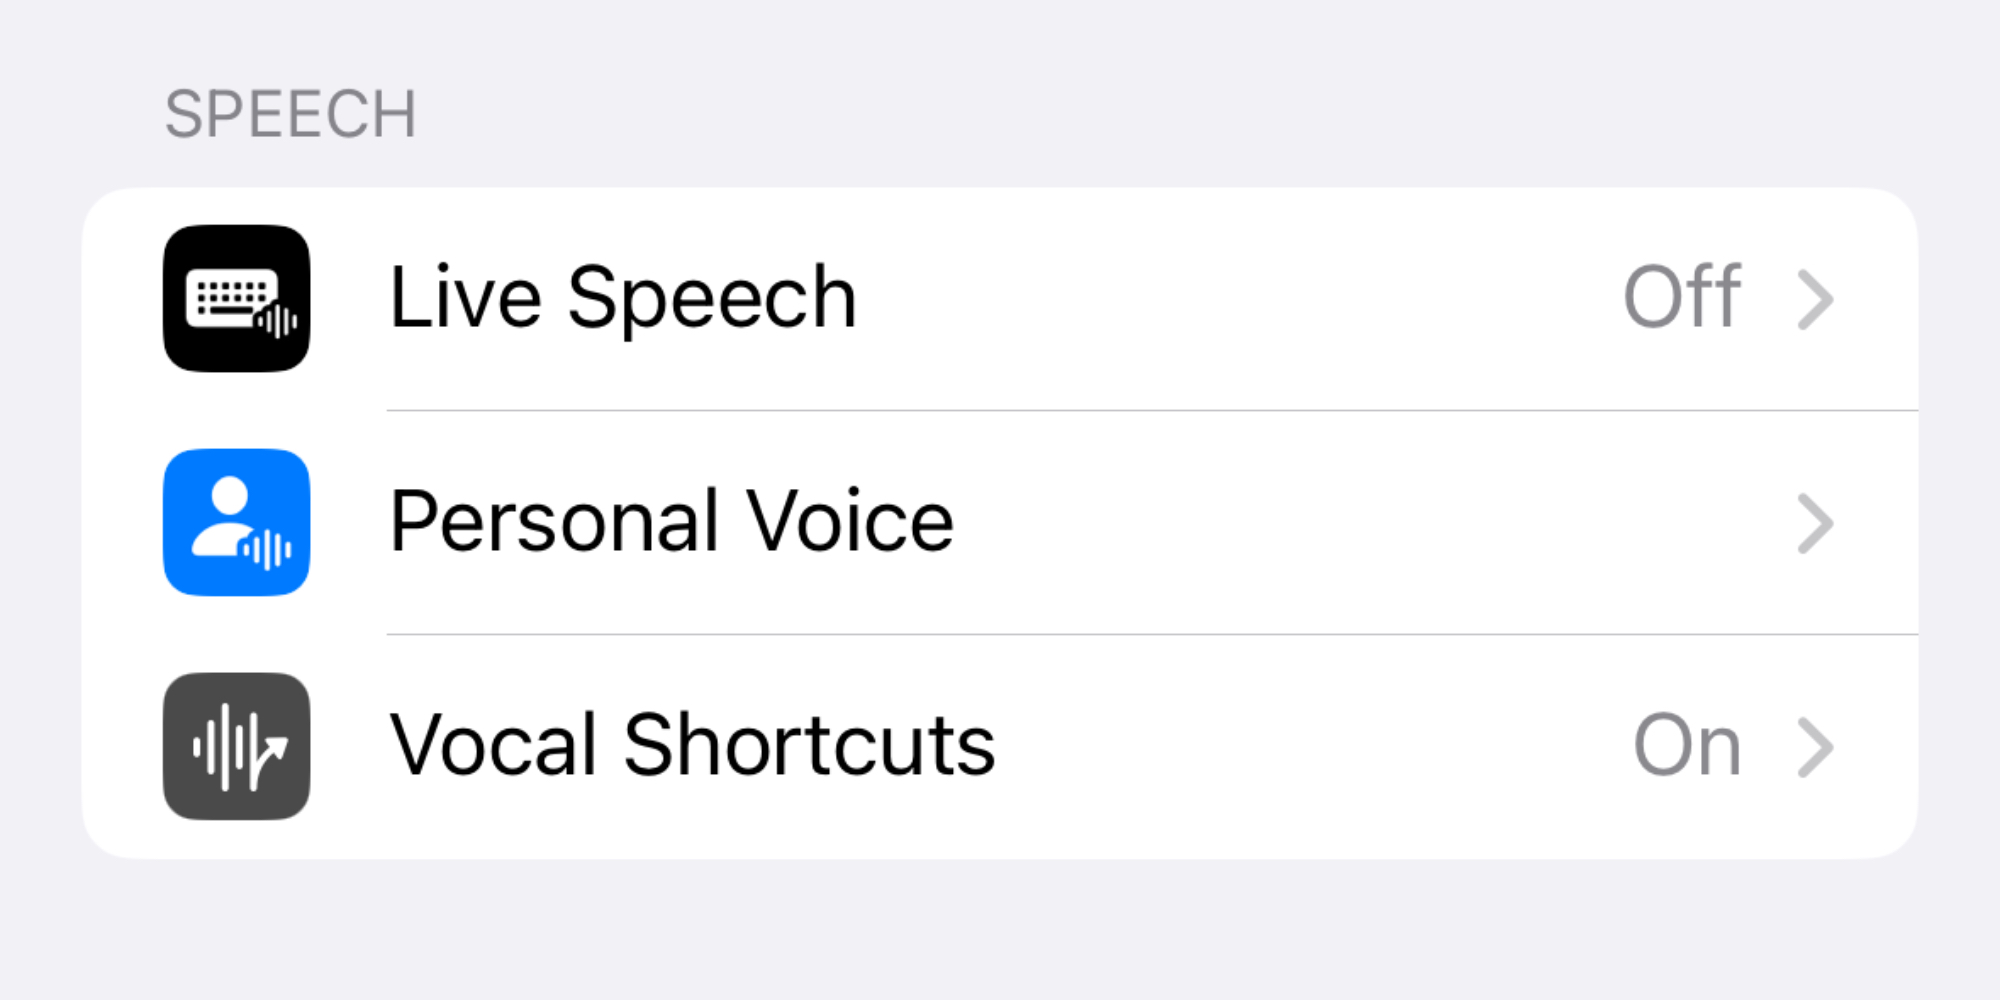 Vocal Shortcuts in iOS 18’s Settings